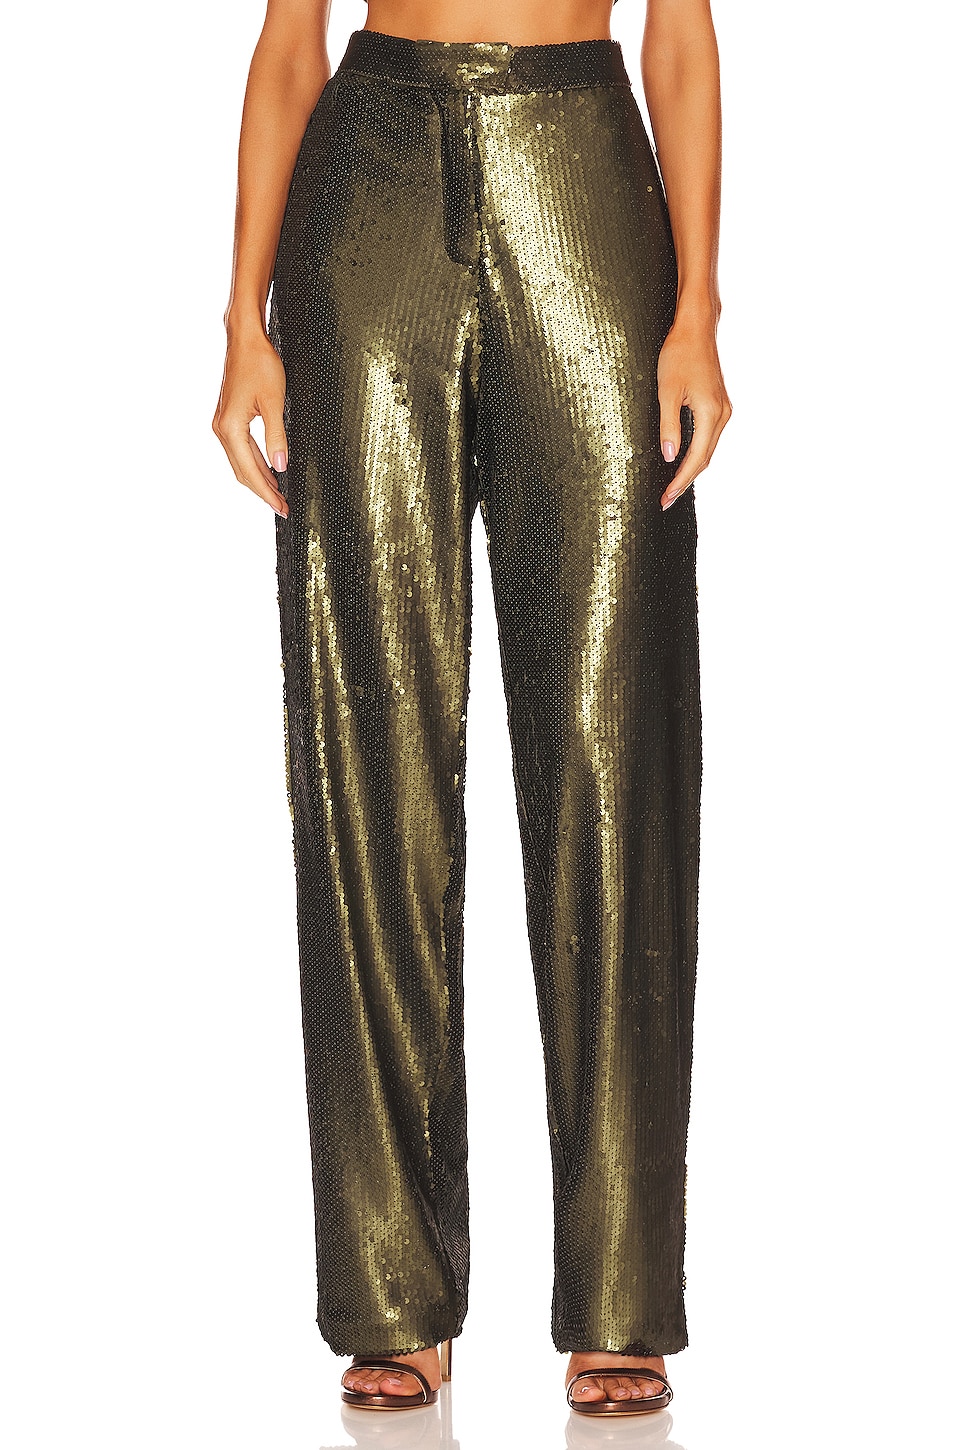 Ronny Kobo Claire Pant in Green Sequins | REVOLVE